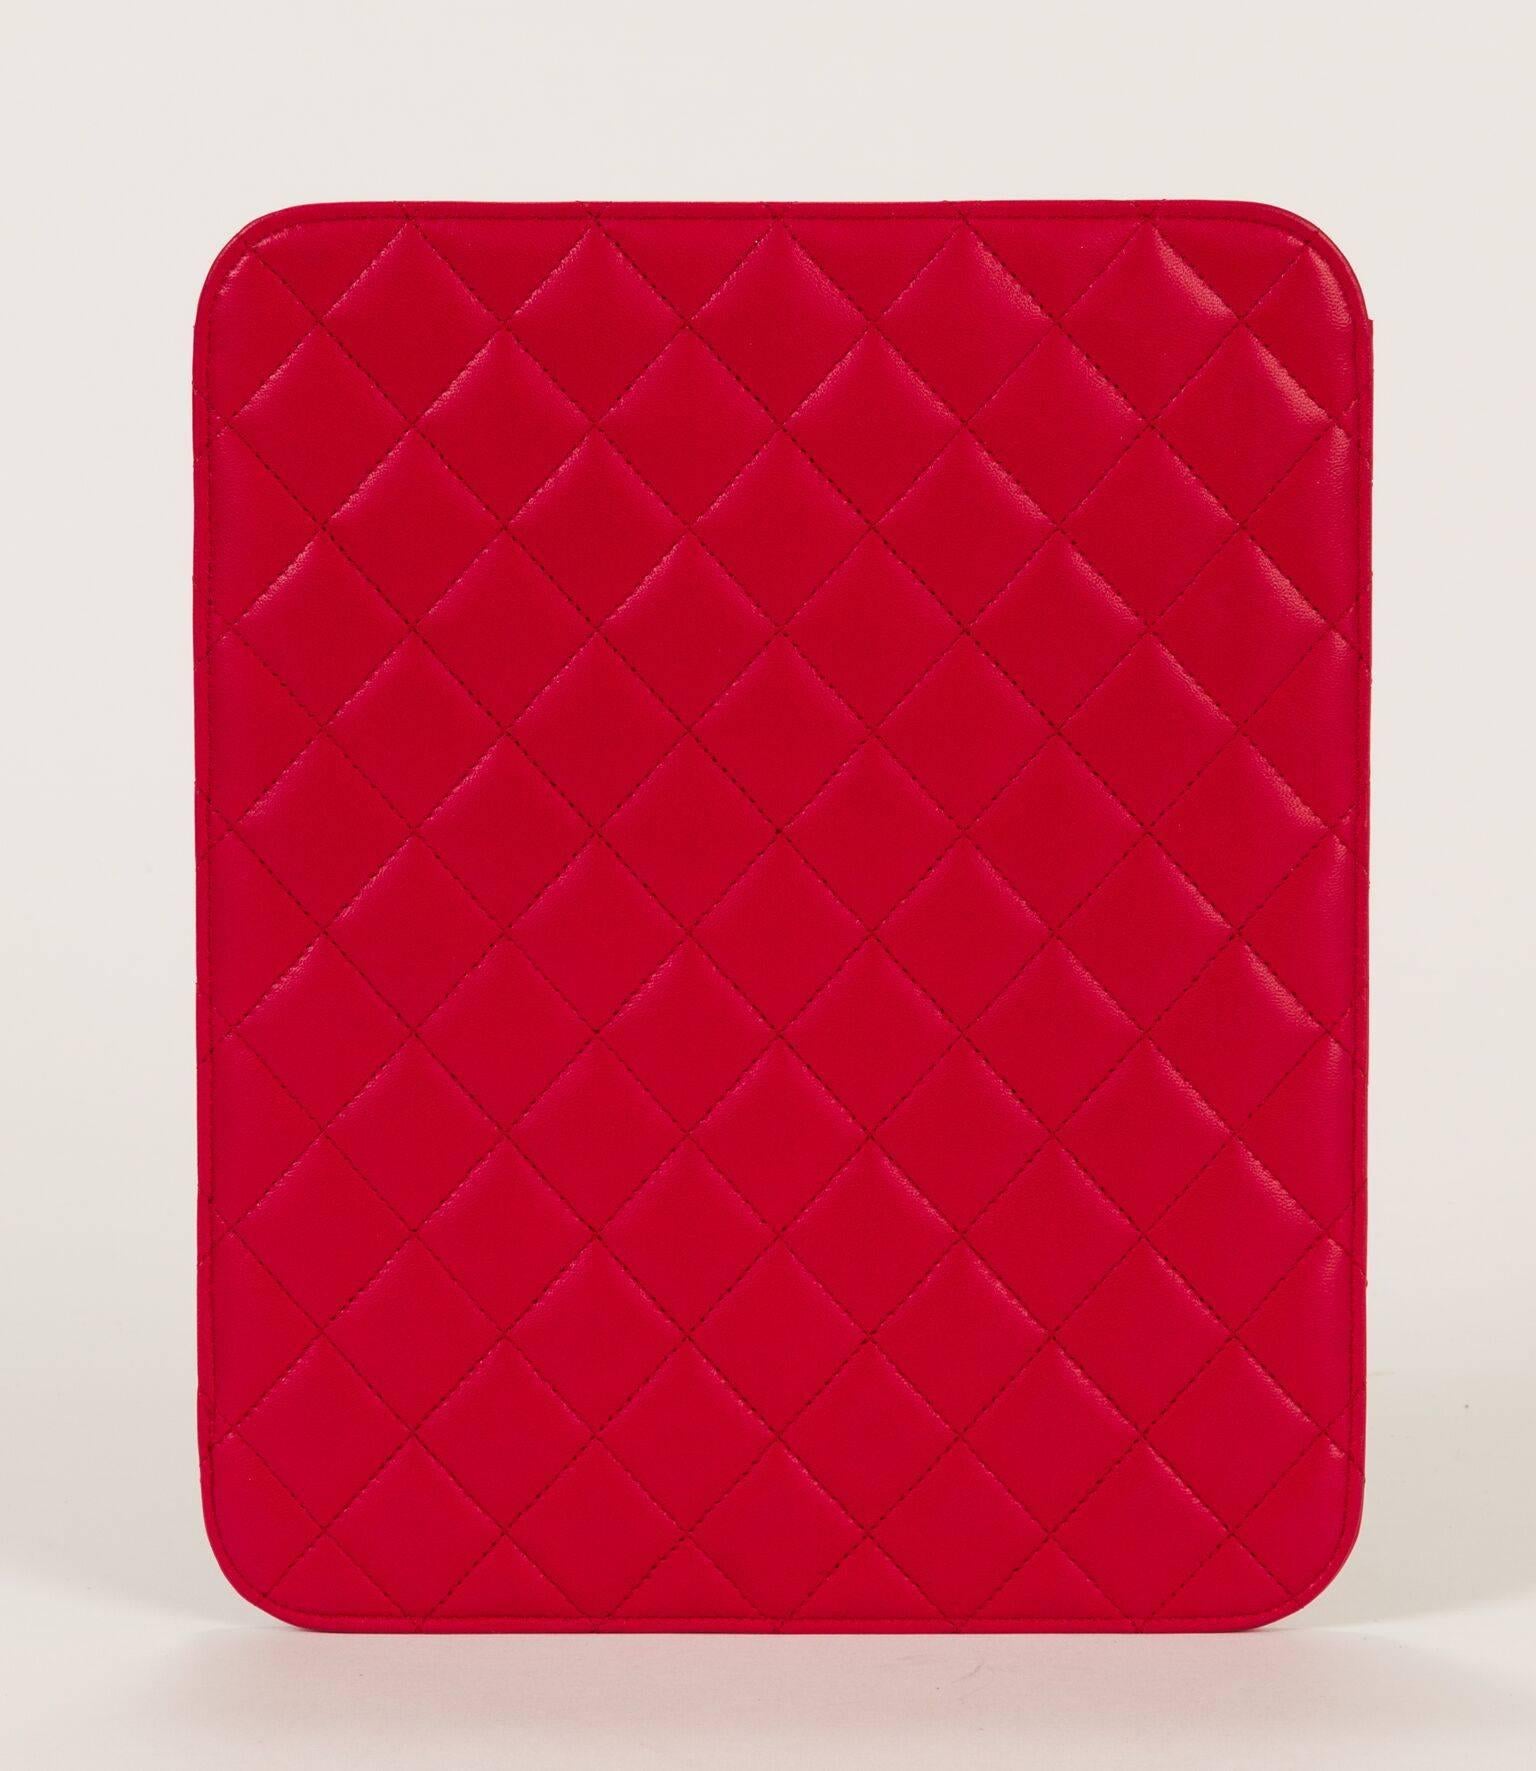 Chanel red lambskin quilted ipad cover case. Comes with original box, hologram and id card. Brand new.